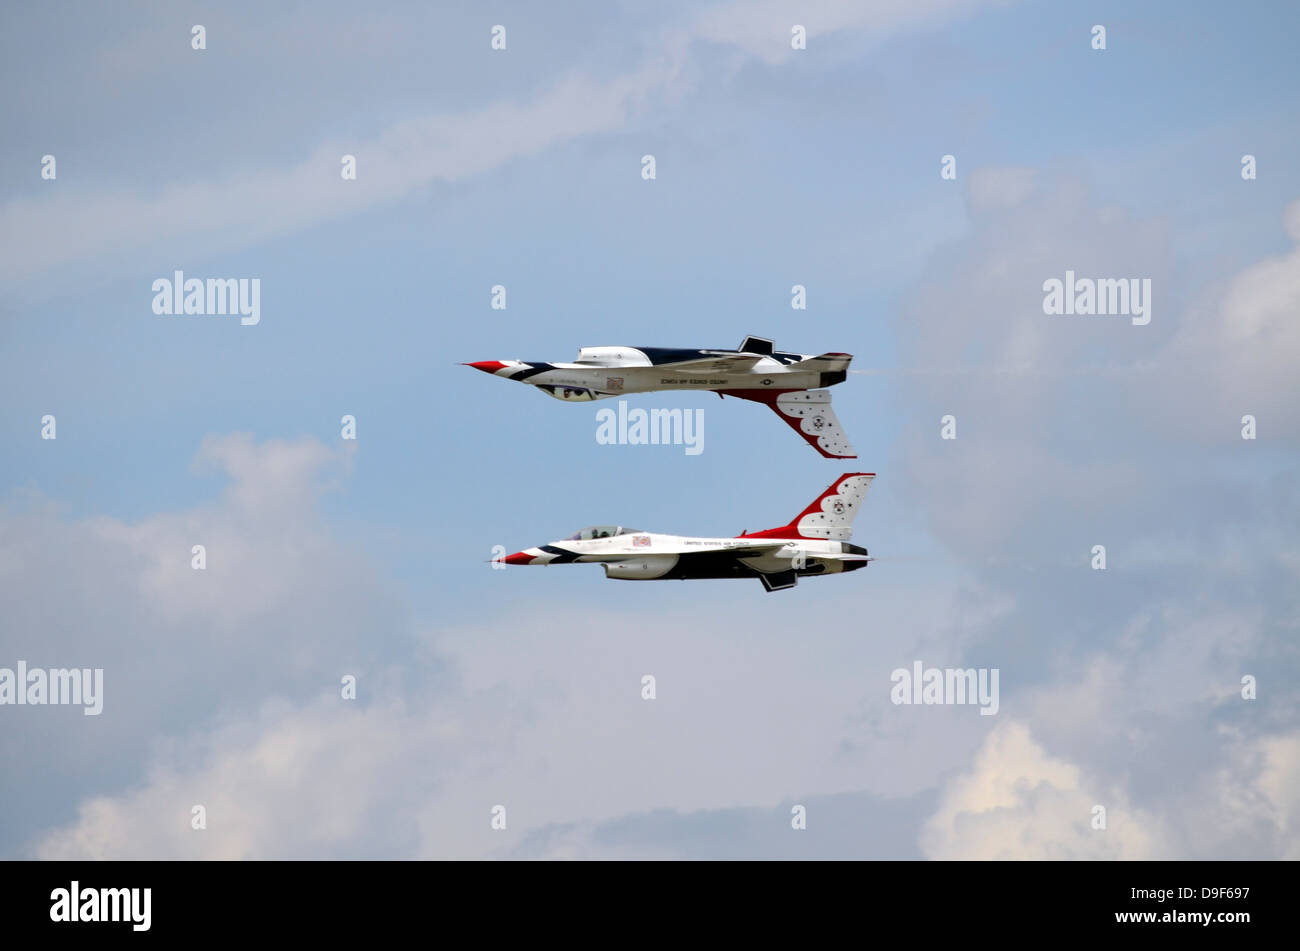 The U.S. Air Force Thunderbirds in calypso formation. Stock Photo